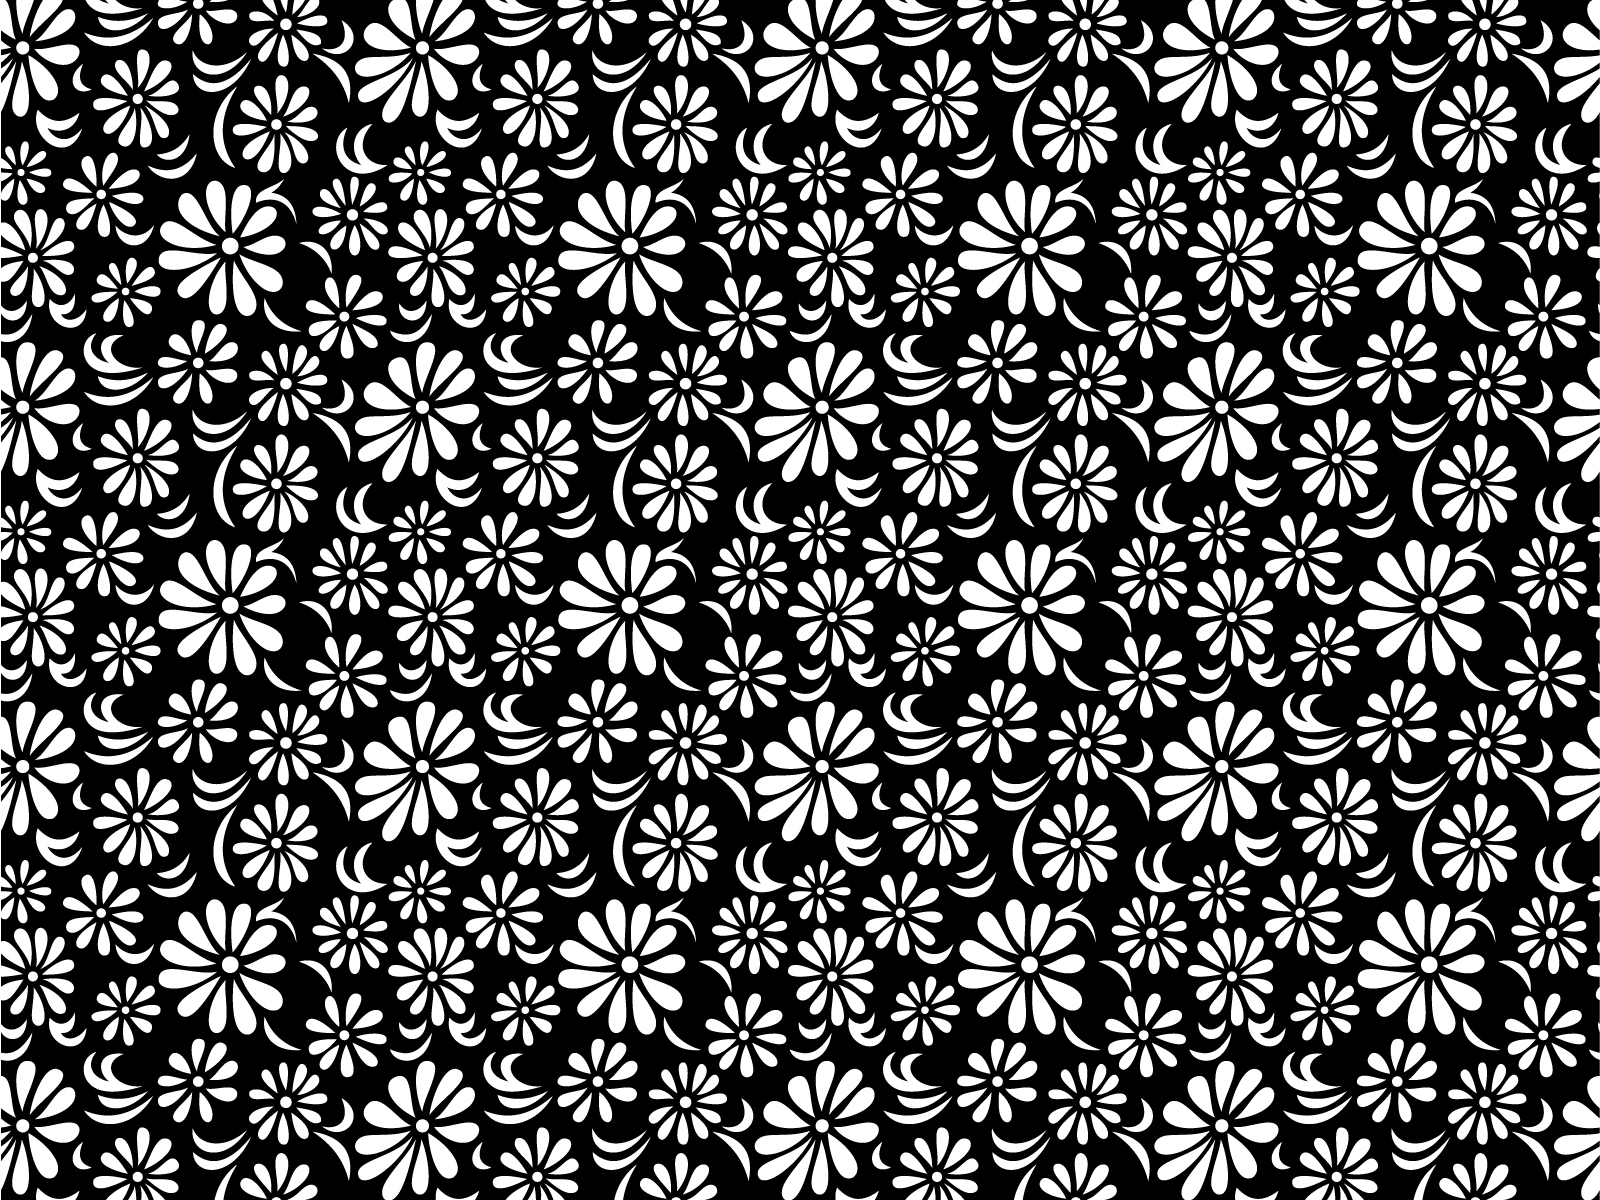 Related Wallpapers. Black and White Floral ...